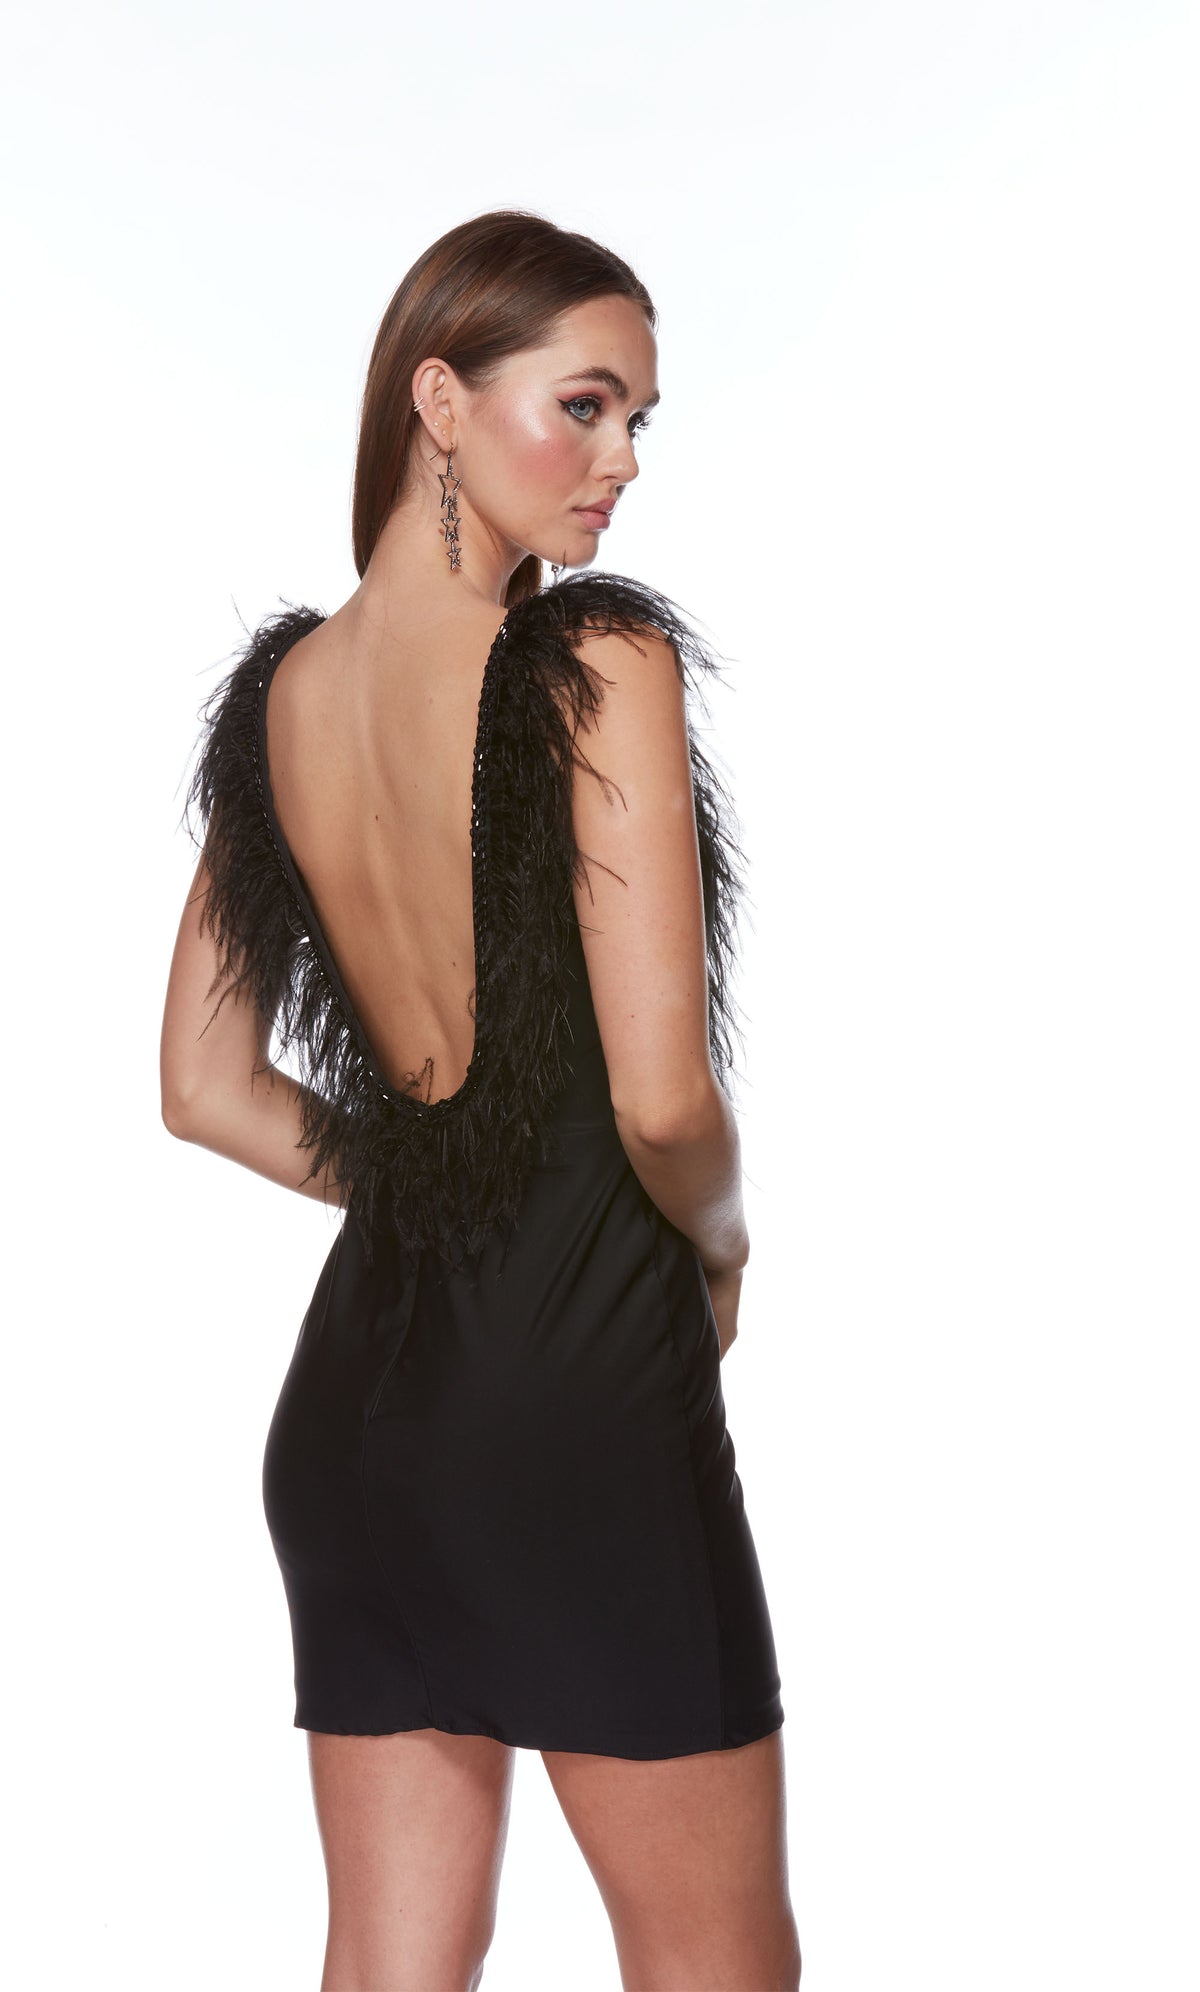 An elegant, short homecoming dress in classic black. The dress features a plunging neckline and a scooped open back trimmed with black stones and feathers. 